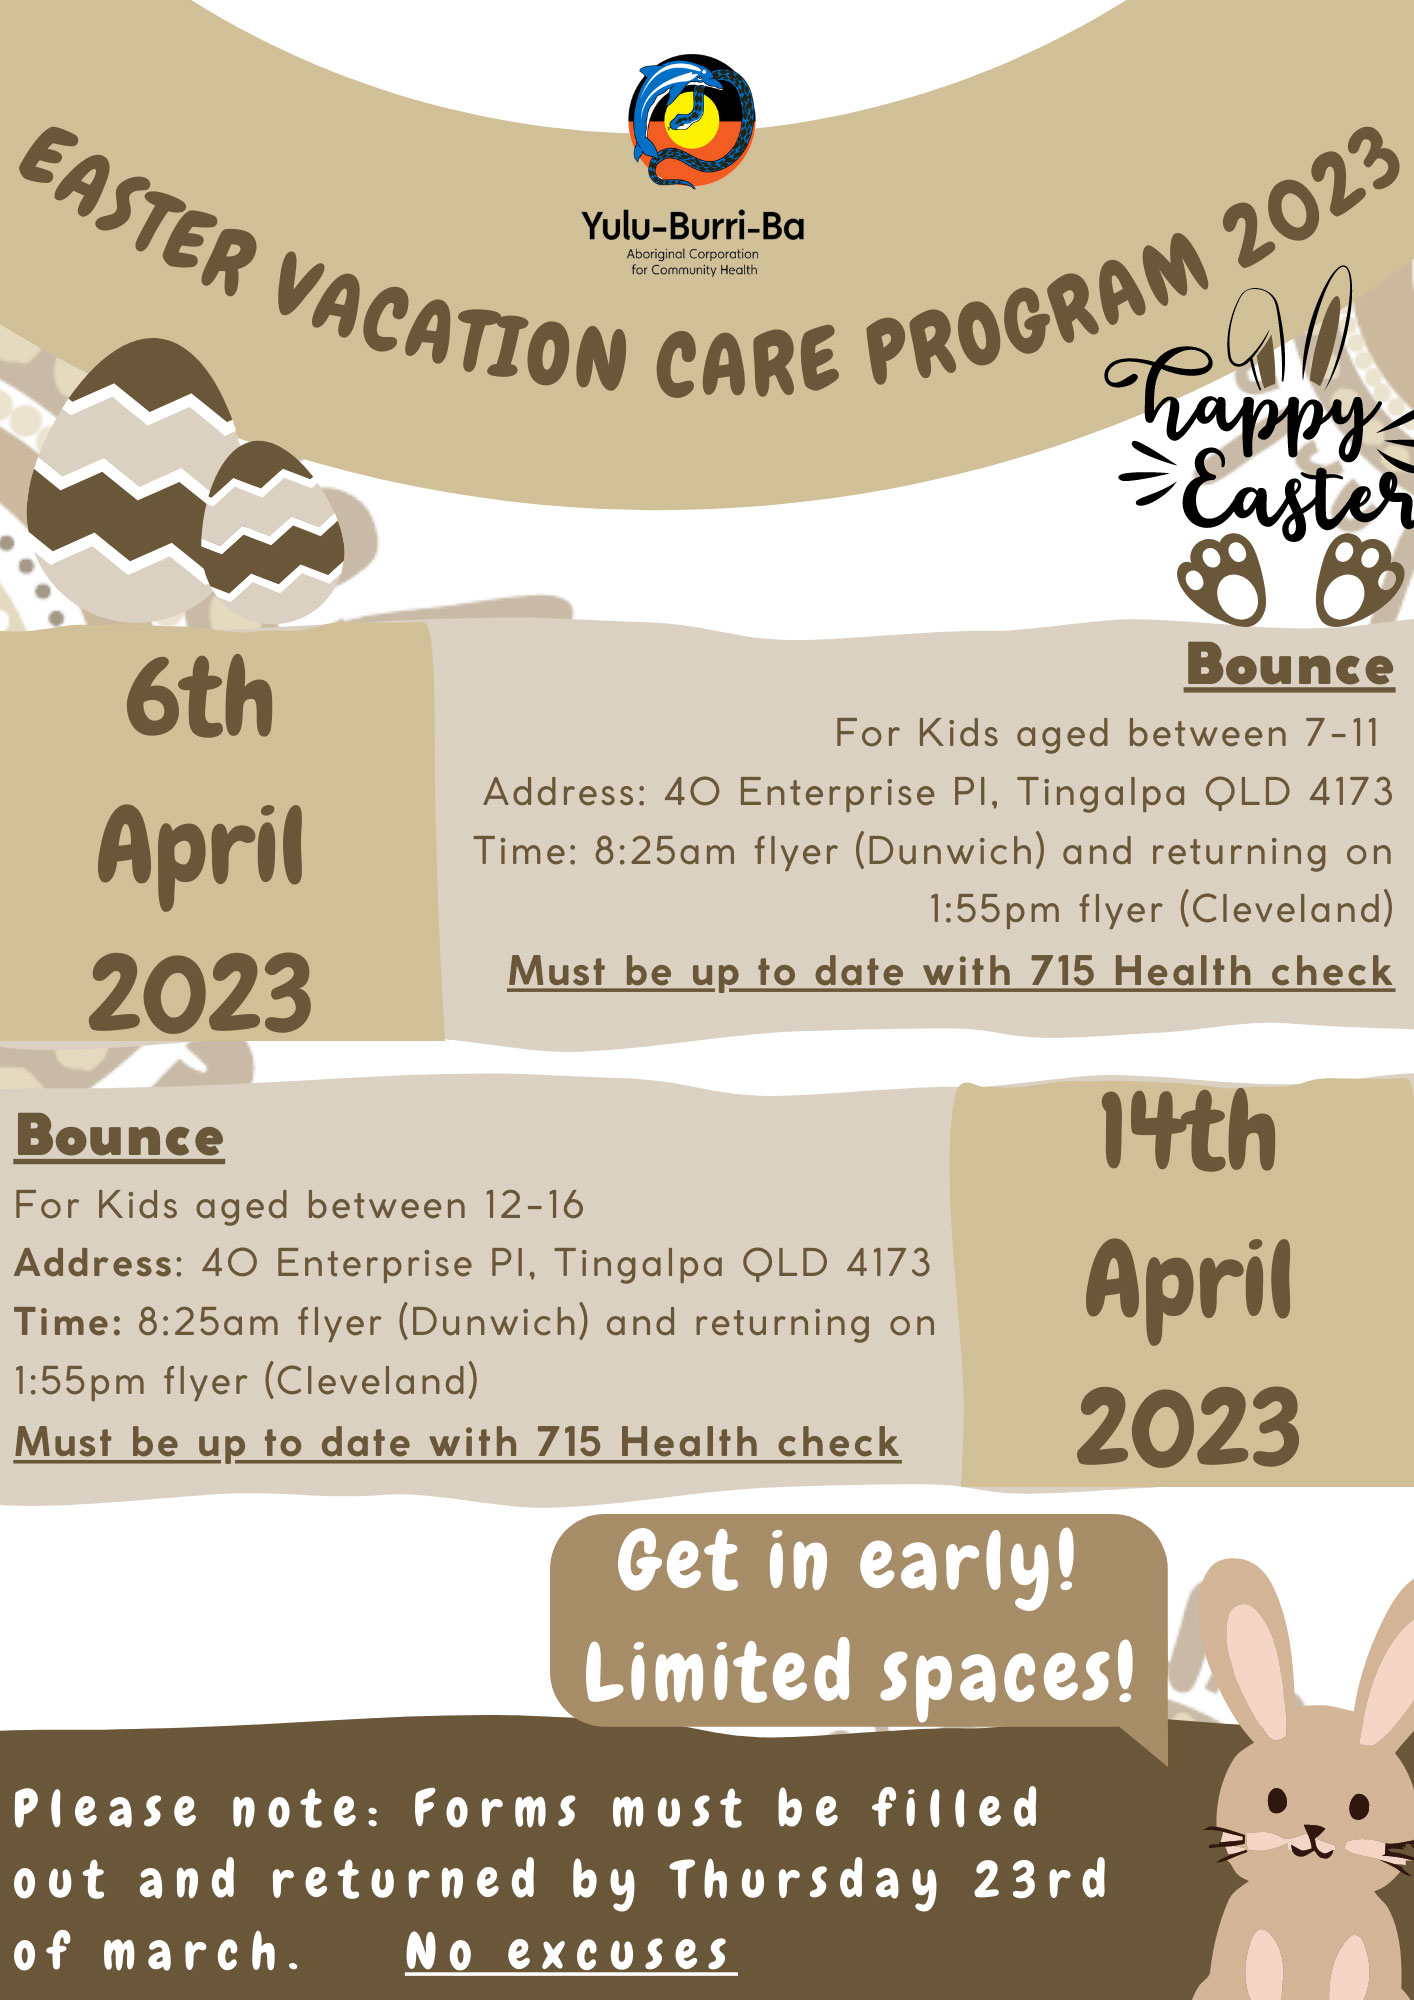 Easter vacation care program 2023